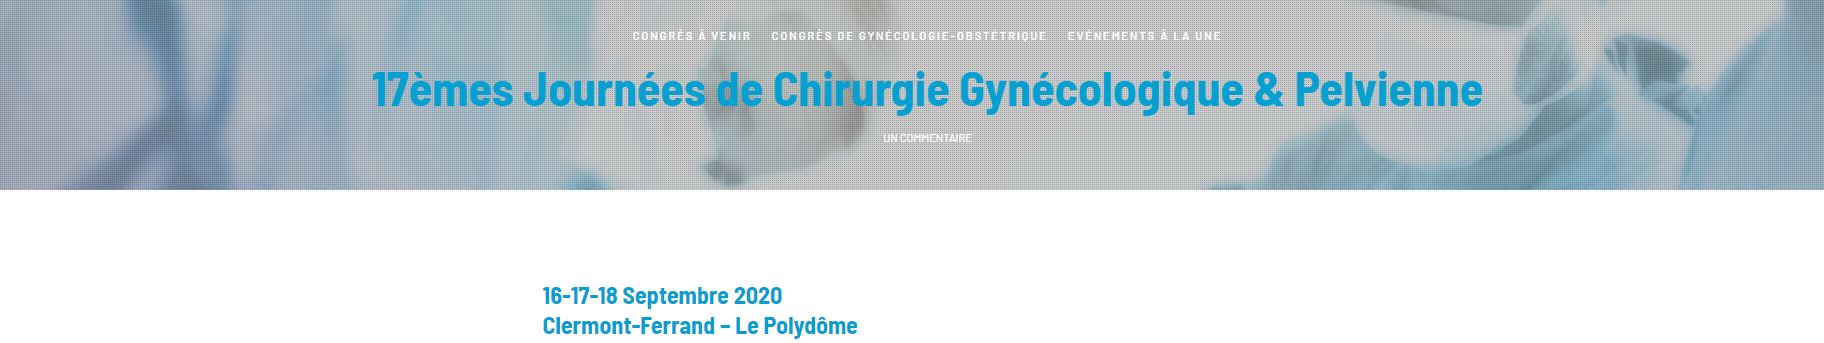 17th SCGP Gynecological and Pelvic Surgery Days 2020